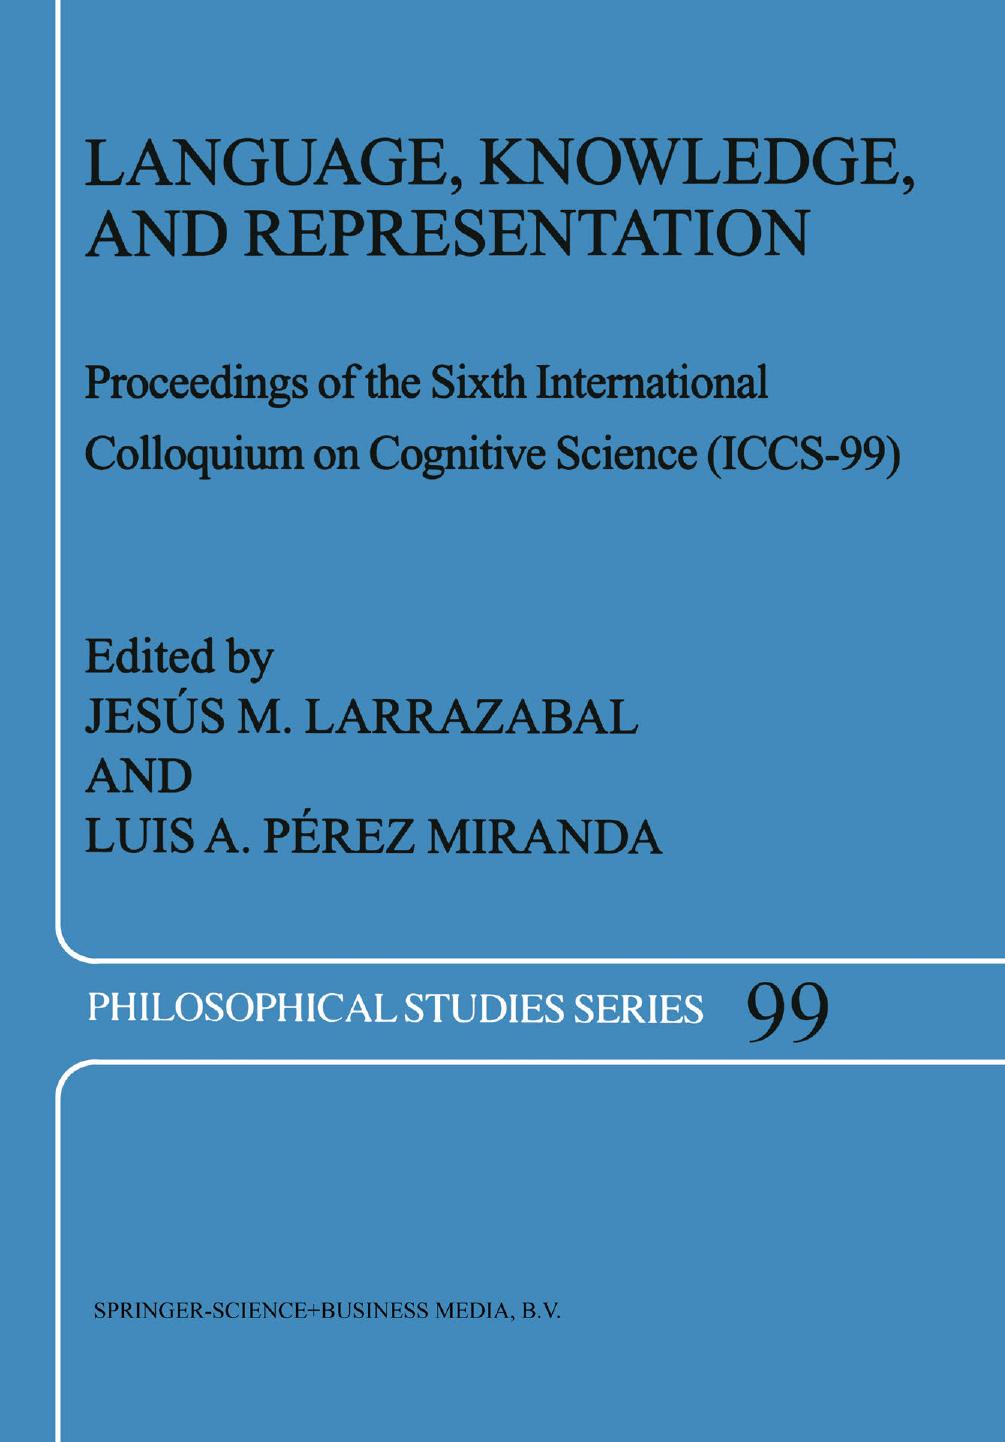 Language, Knowledge, and Representation: Proceedings of the Sixth International Colloquium on Cognitive Science (ICCS-99)